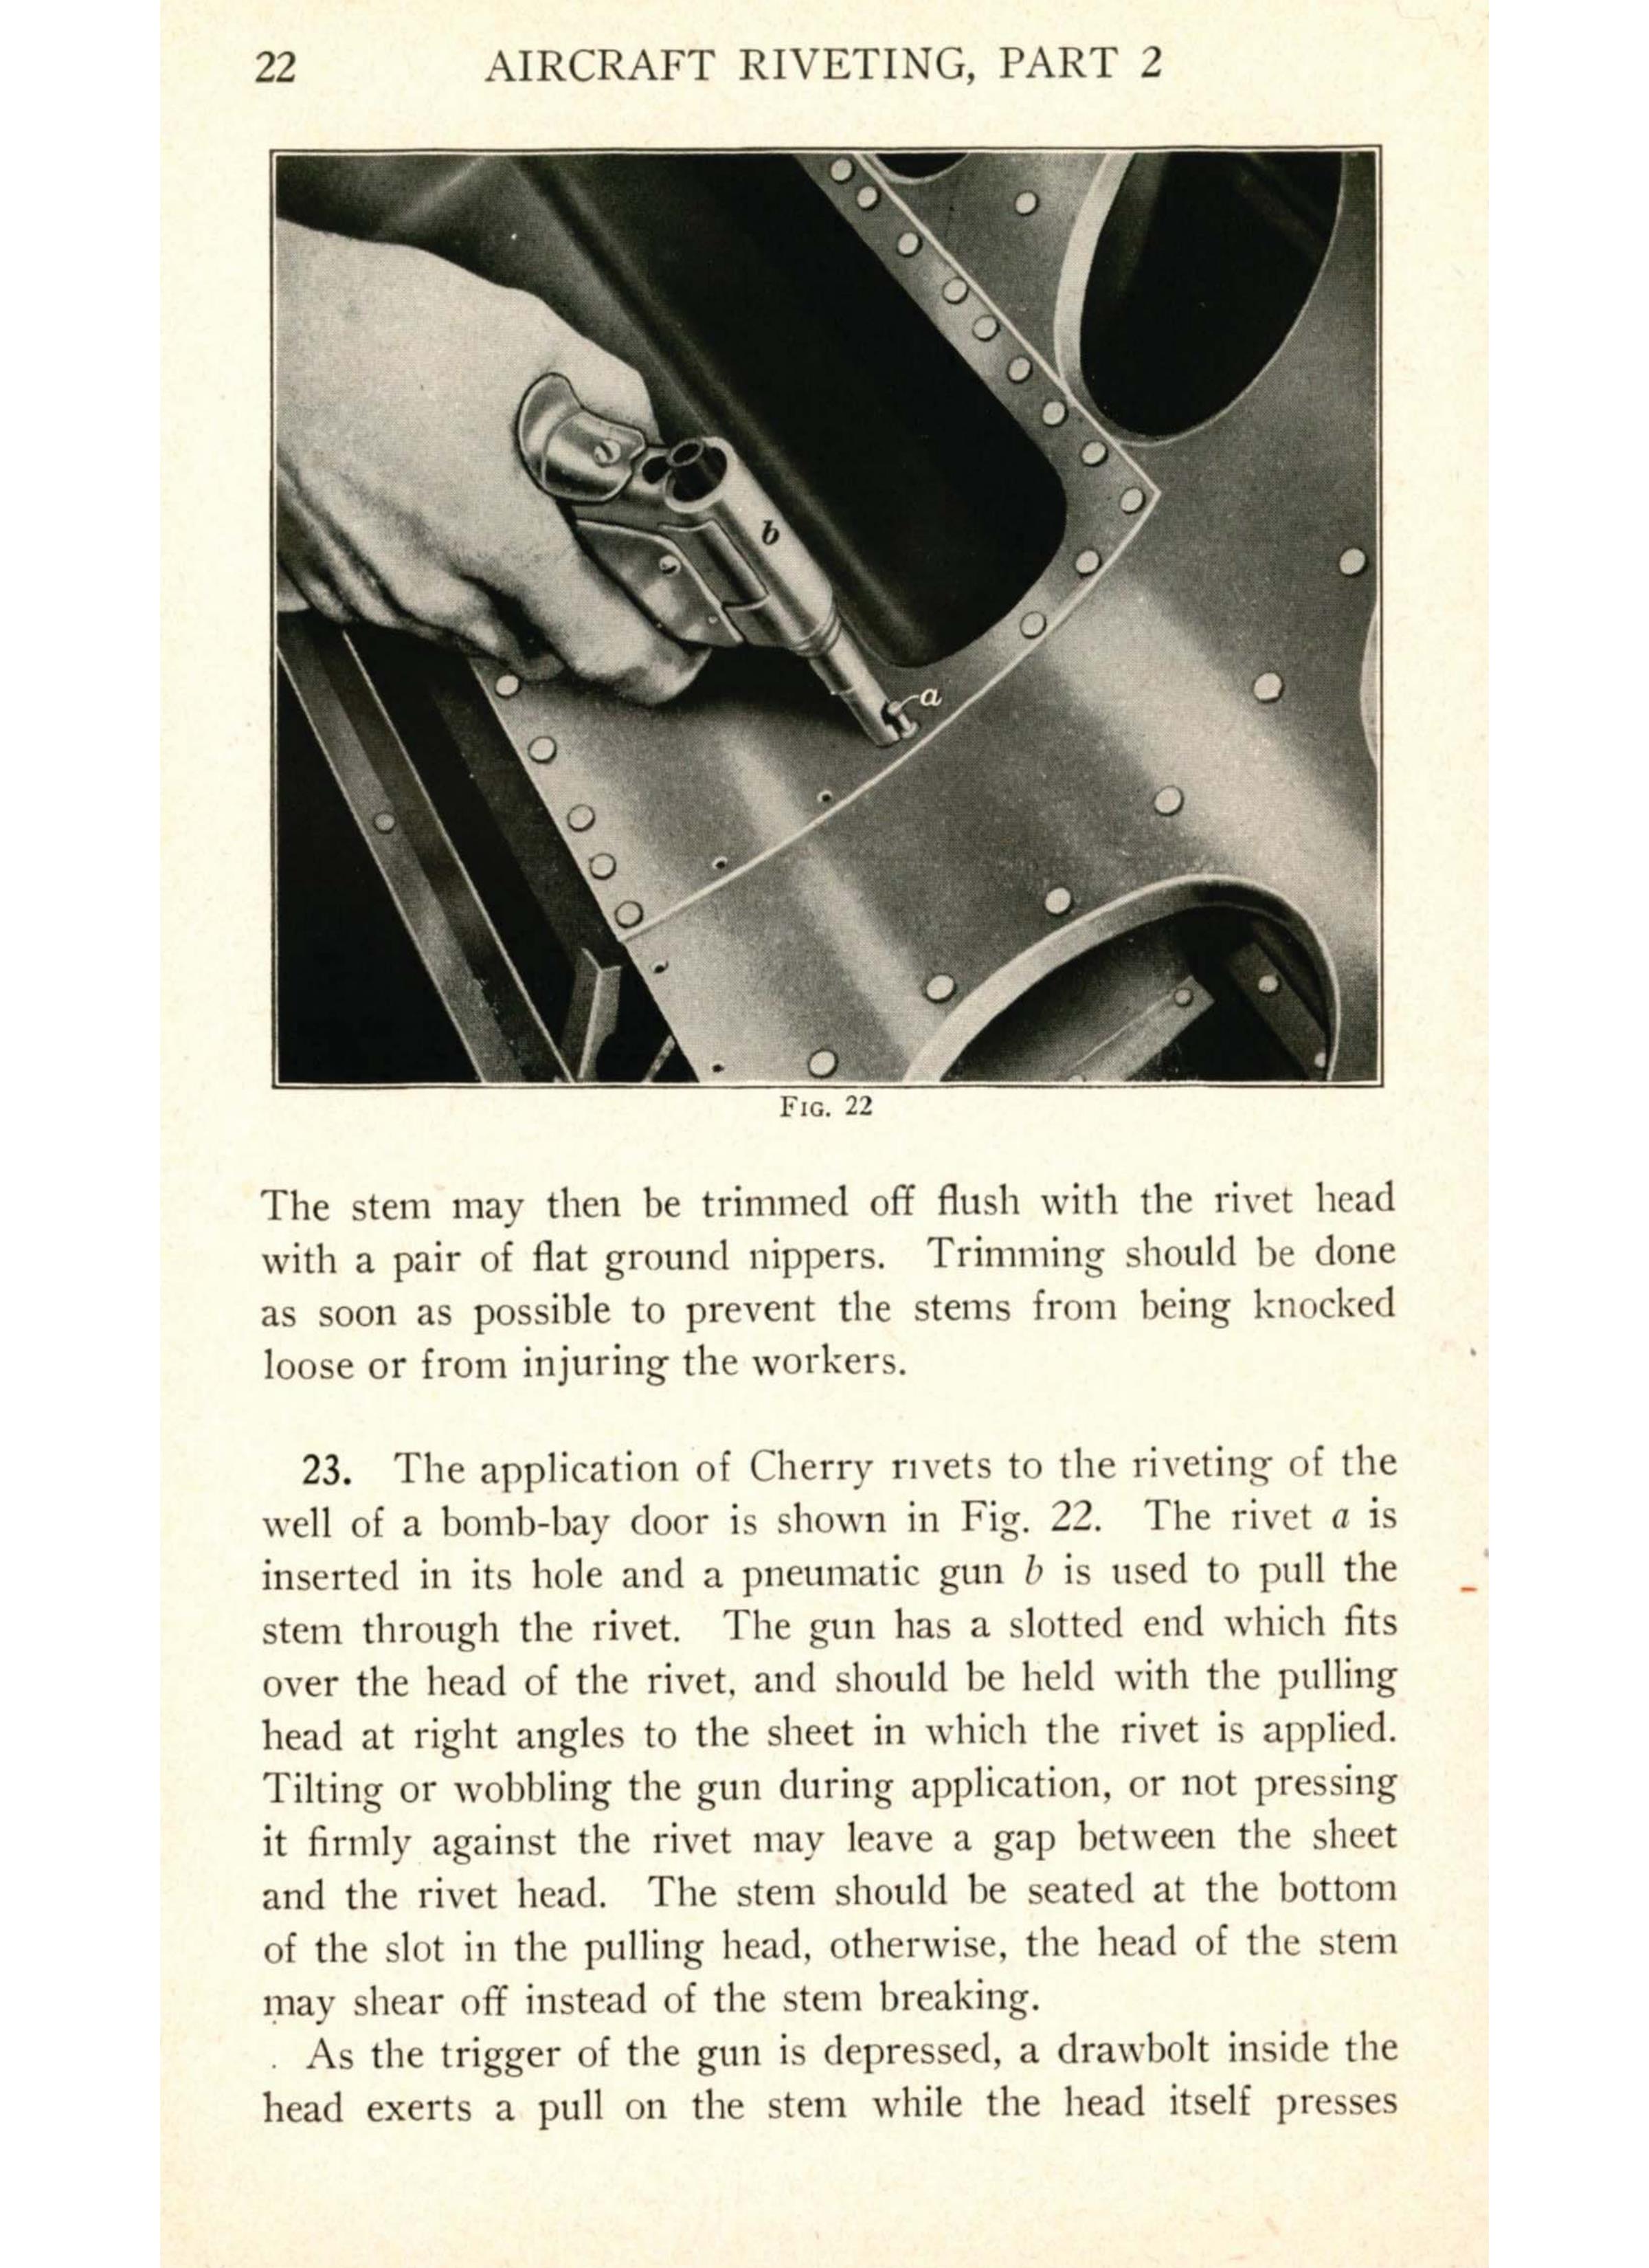 Sample page 24 from AirCorps Library document: Aircraft Riveting Part 2 - Bureau of Aeronautics